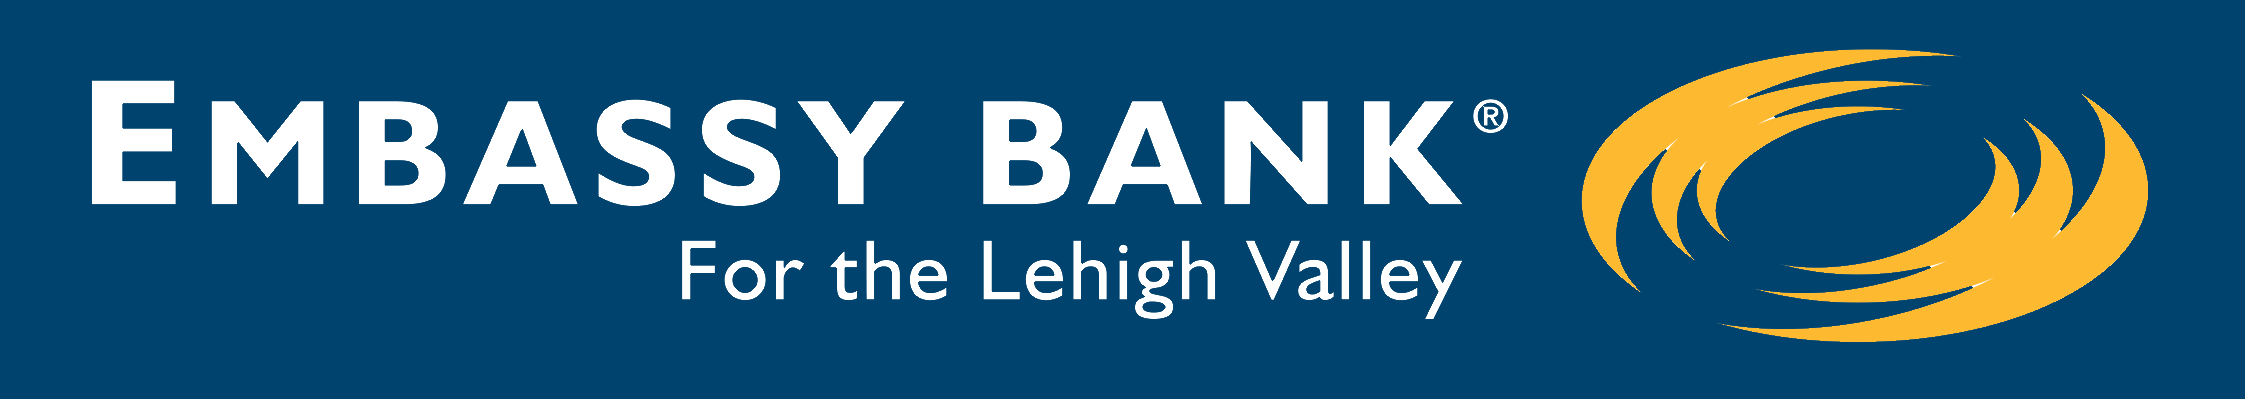 Embassy Bank For the Lehigh Valley | Login